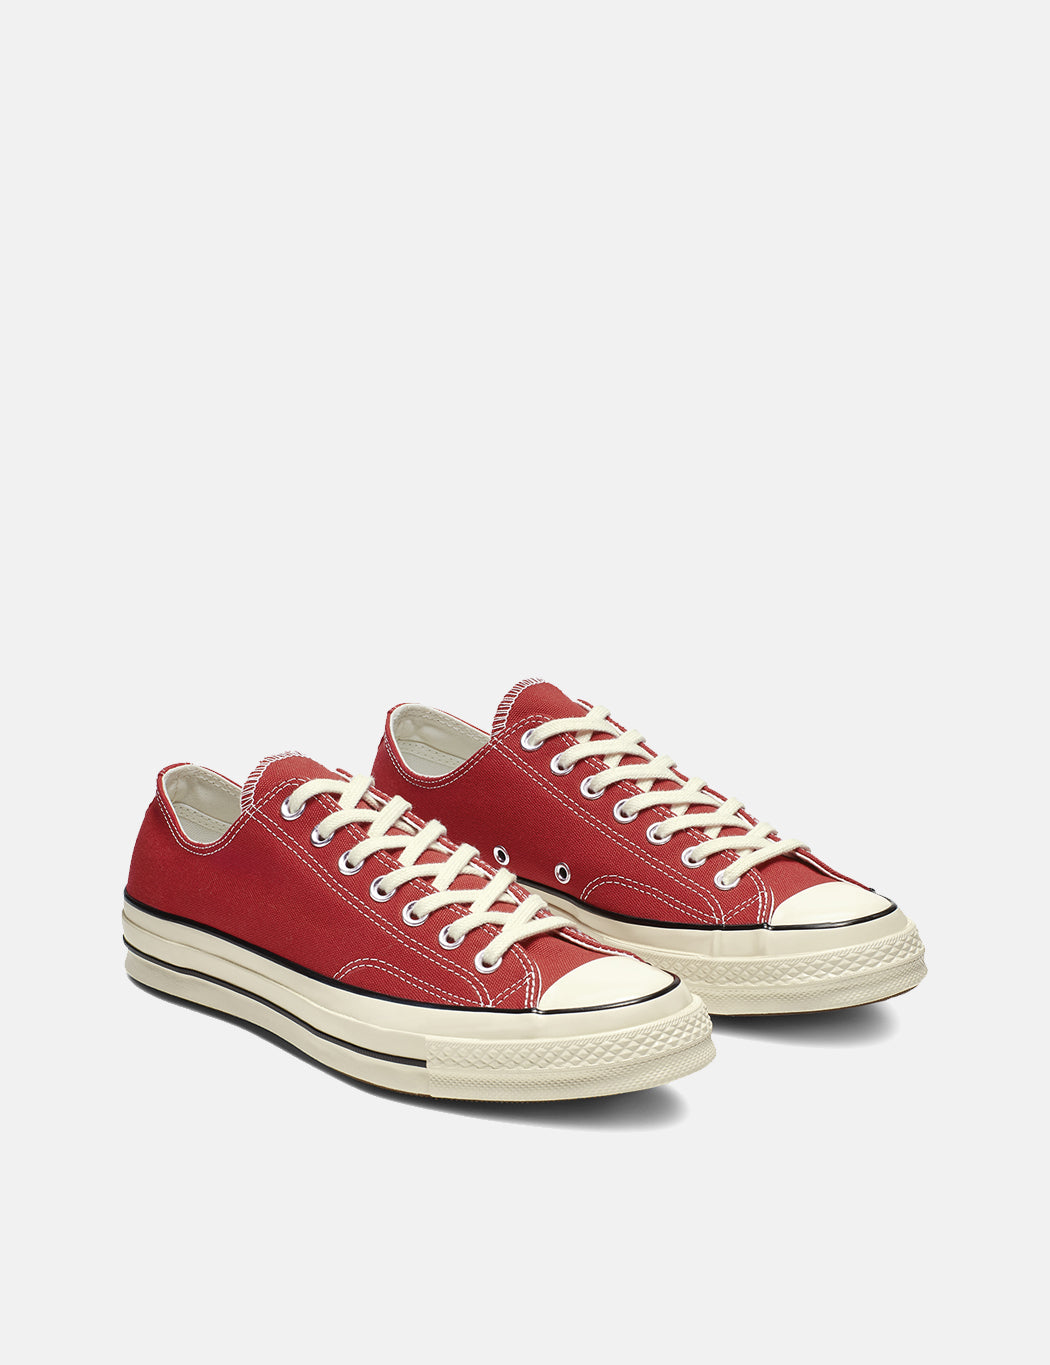 red low converse